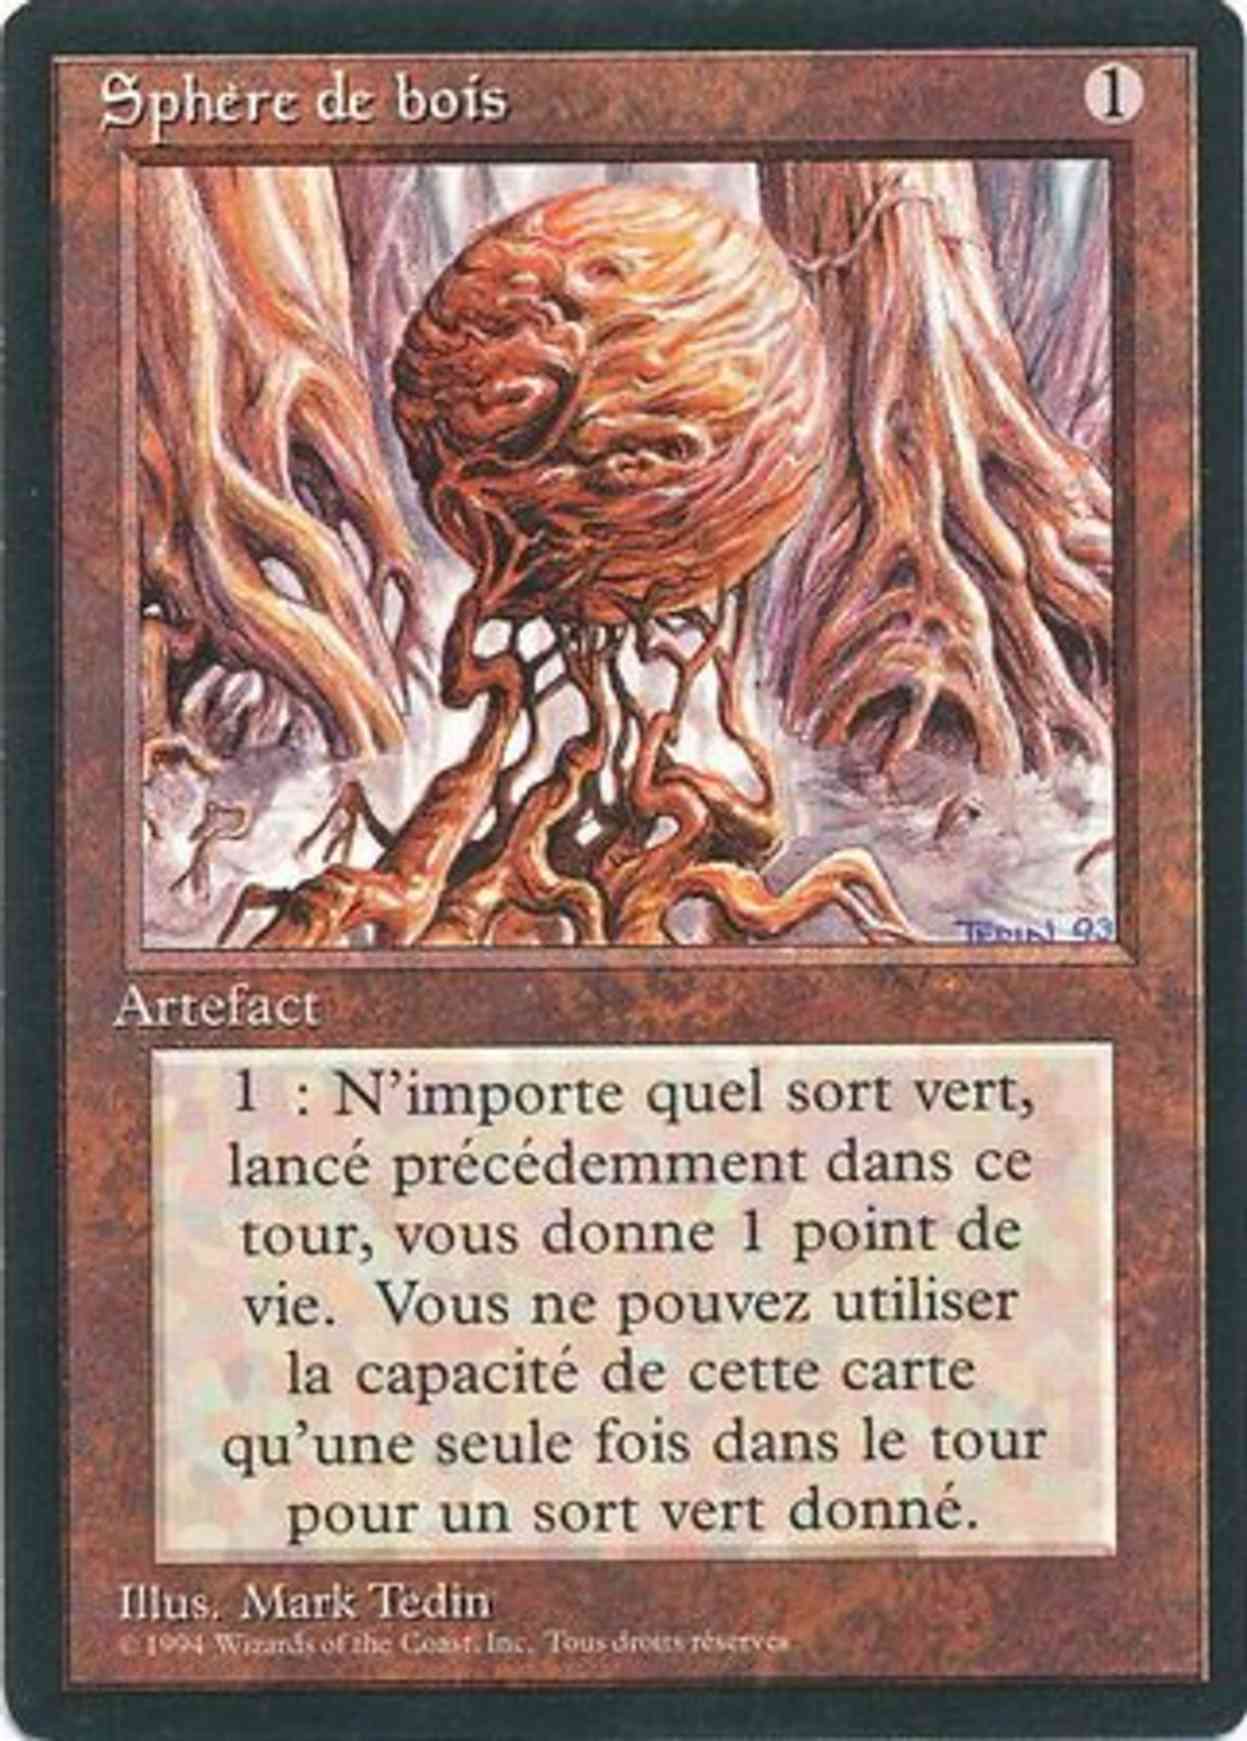 Wooden Sphere magic card front